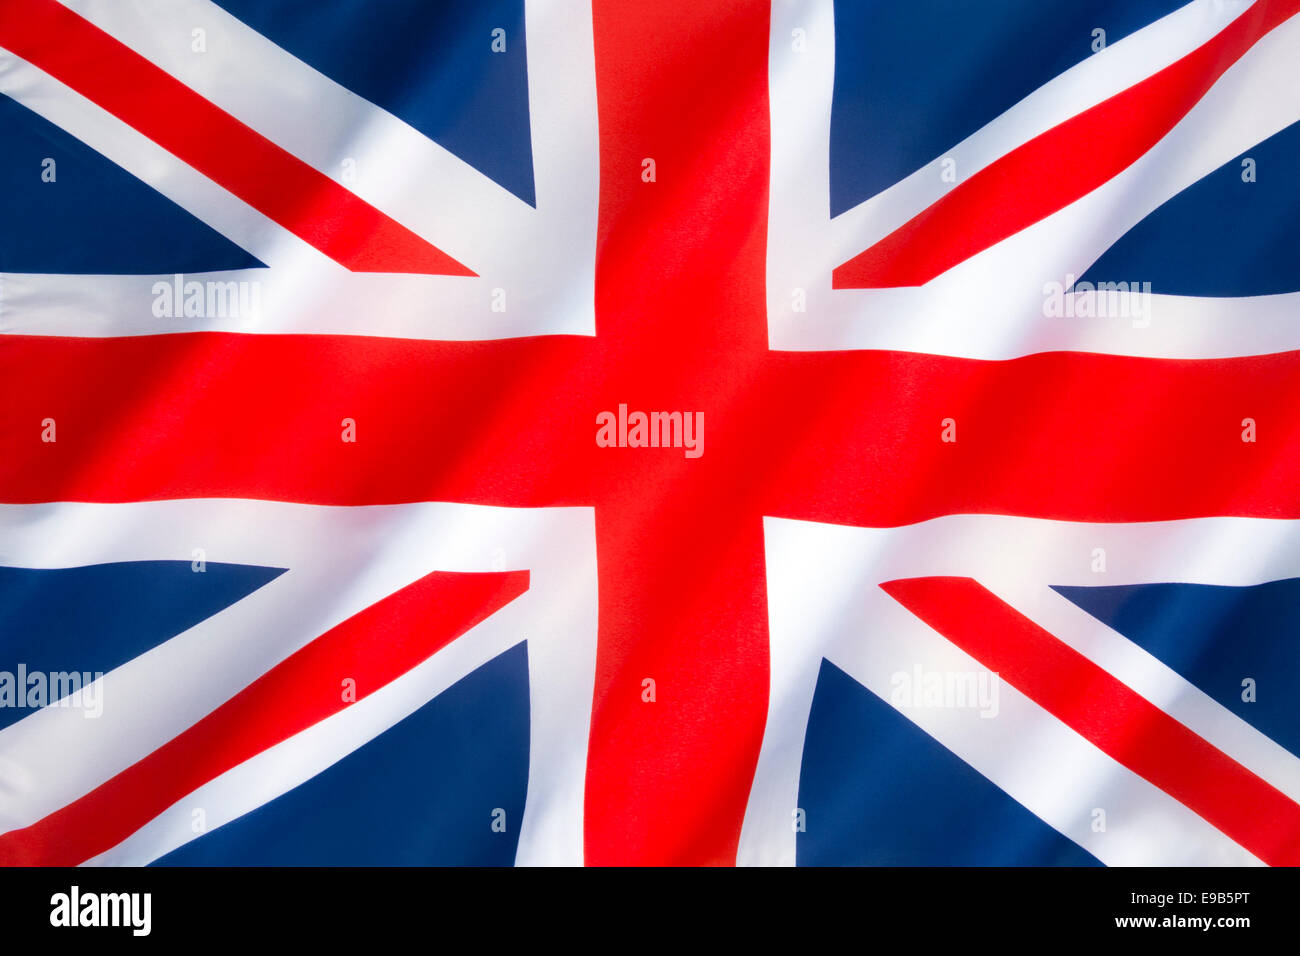 Flag of the United Kingdom of Great Britain and Northern Ireland - Also known as the Union Jack or Union Flag. Stock Photo